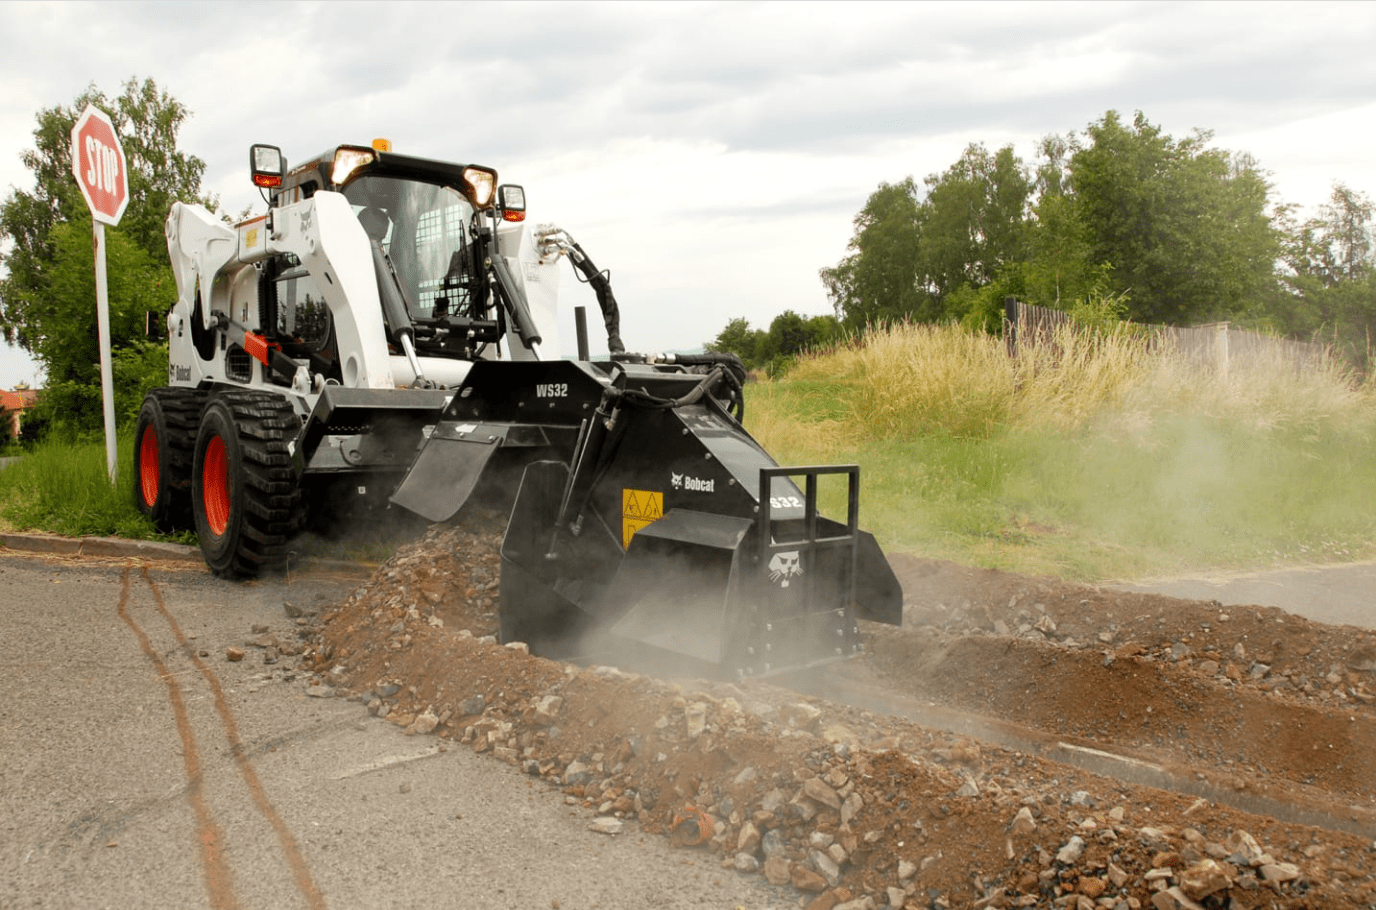 Browse Specs and more for the S850 Skid-Steer Loader - Bobcat of the Rockies